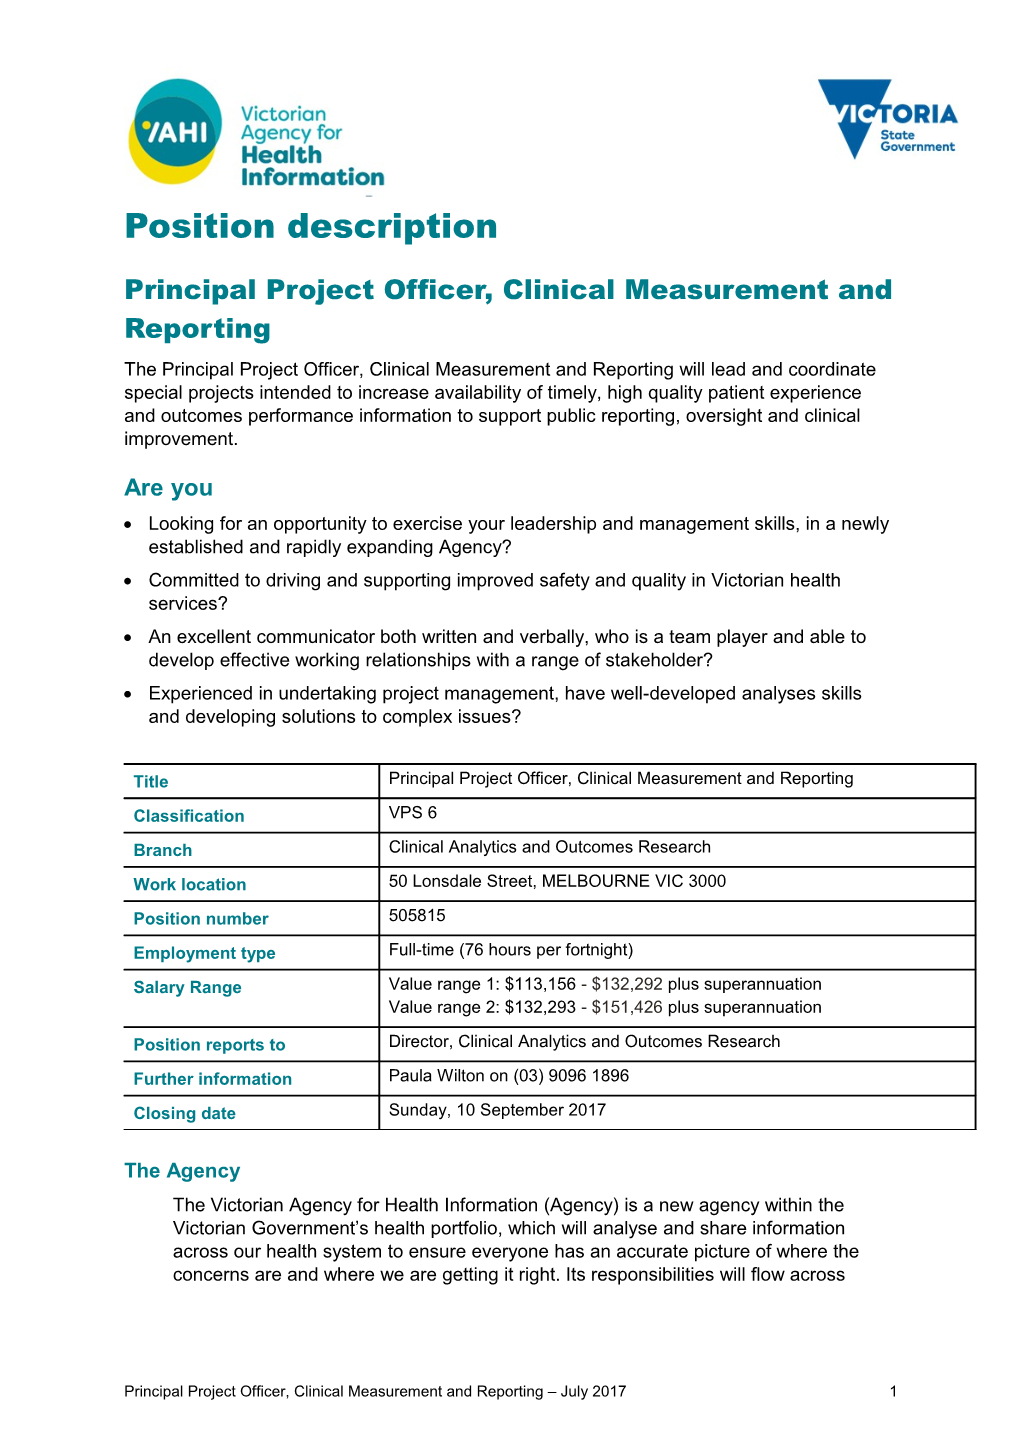 Principal Project Officer, Clinical Measurement and Reporting